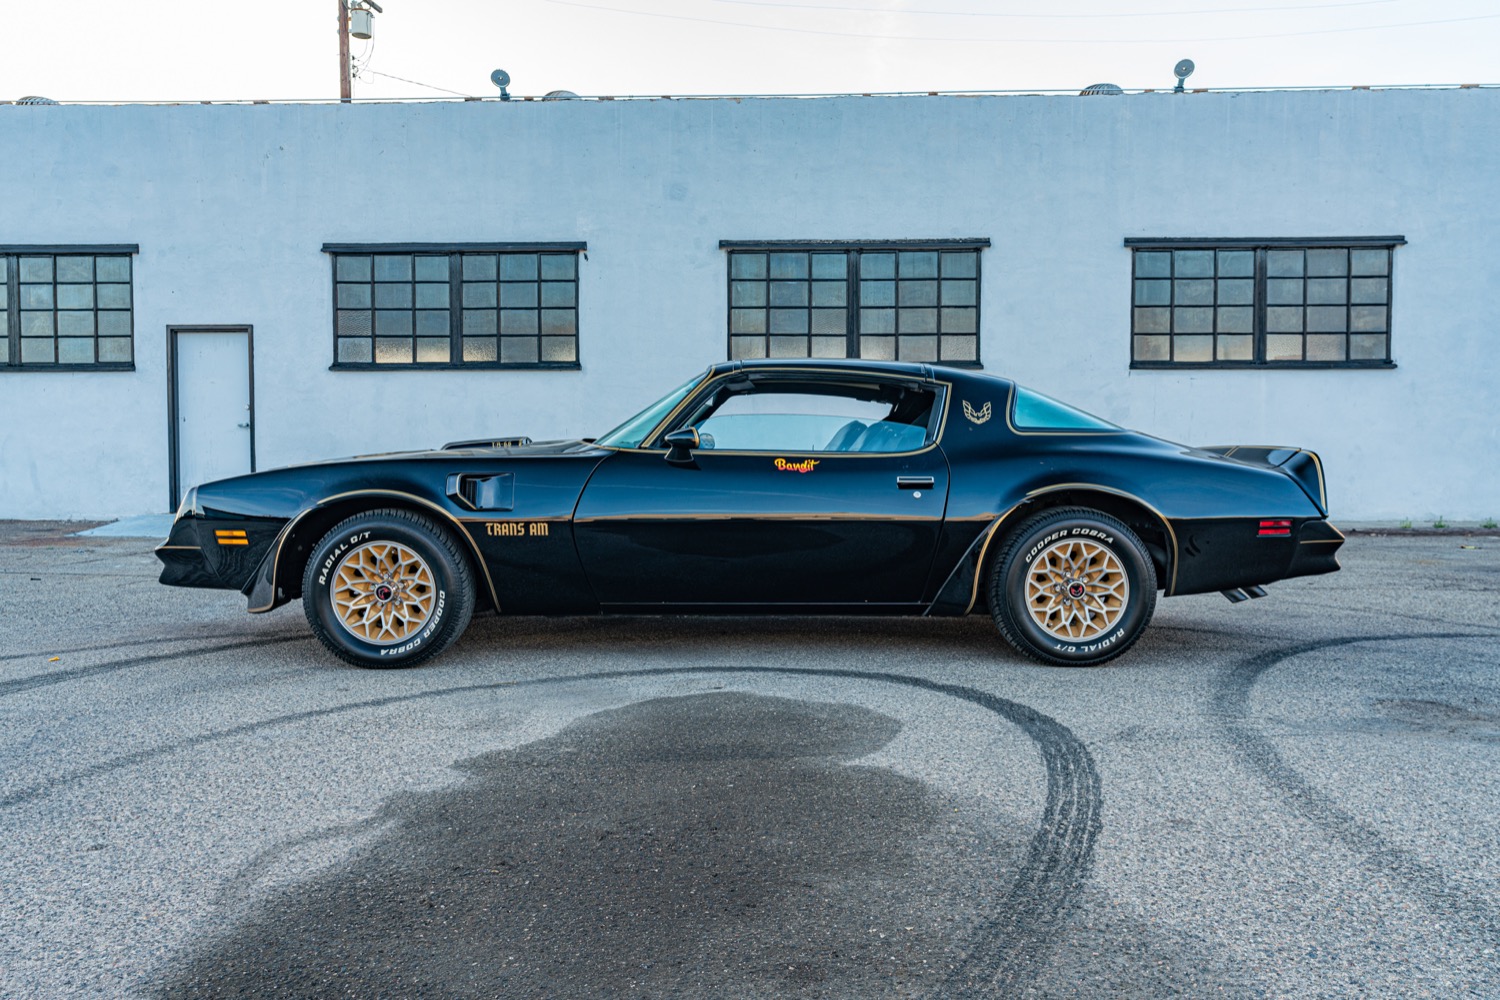 https://gmauthority.com/blog/wp-content/uploads/2020/05/1977-Pontiac-Firebird-Trans-Am-Y82-Special-Edition-Package-black-and-gold-Burt-Reynolds-Smokey-and-the-Bandit-006.jpg